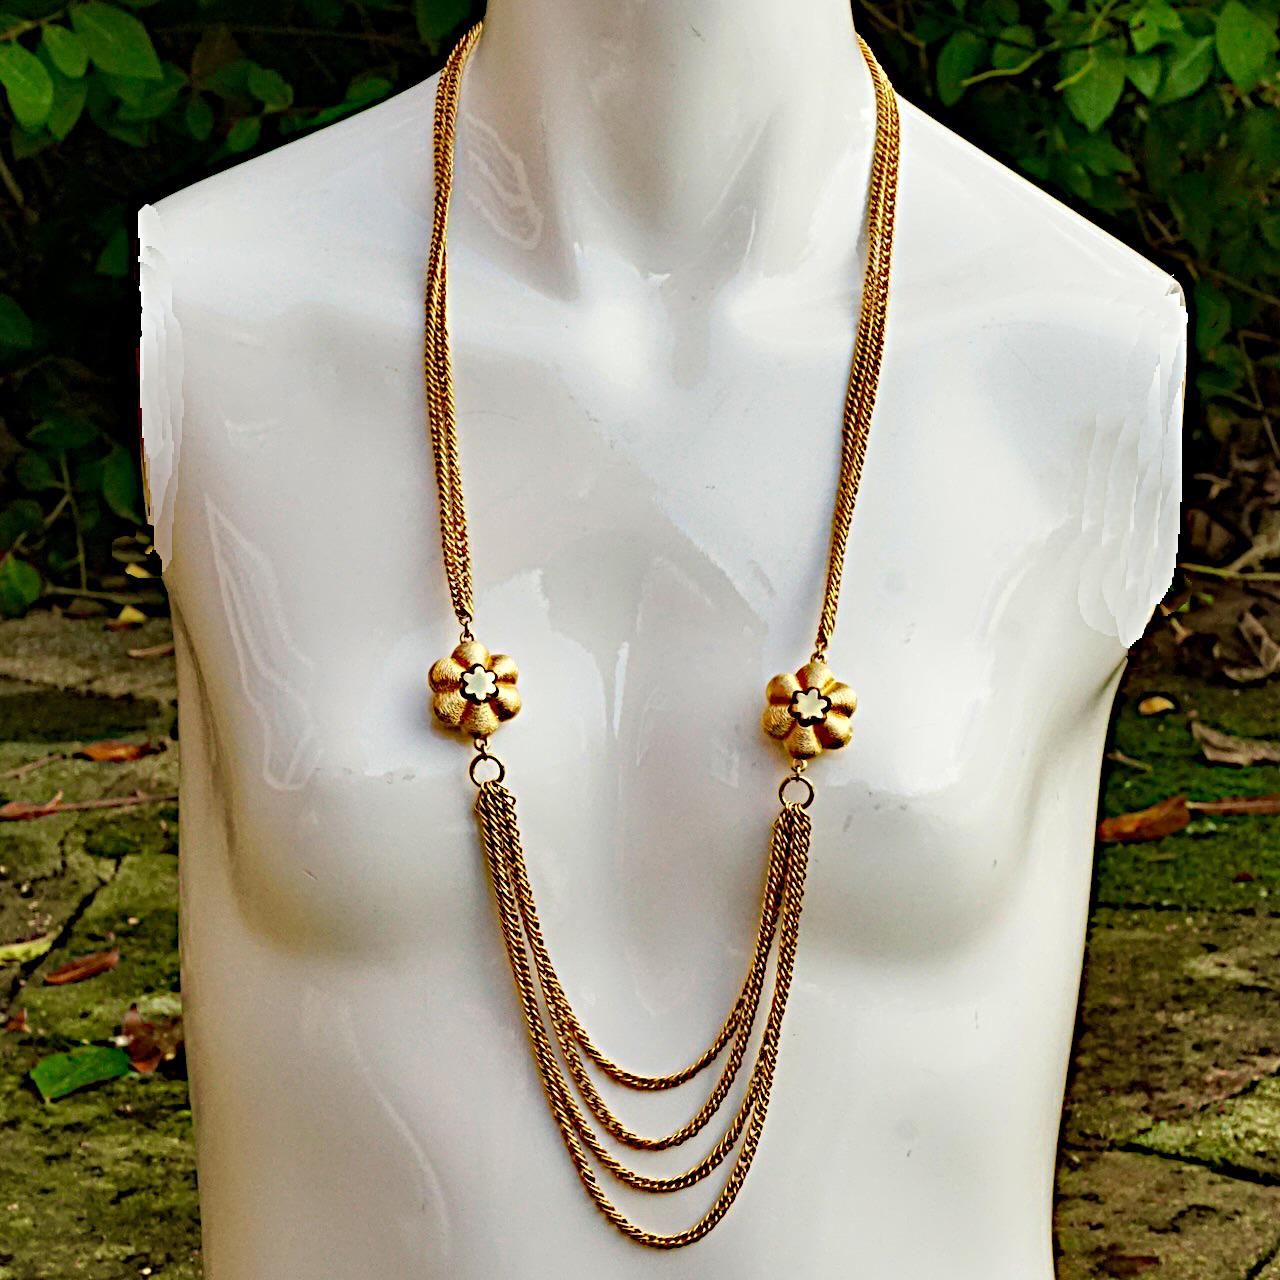 Roget gold plated necklace with four strands of chains, and featuring two brushed and shiny flowers. The shortest length is approximately 76 cm / 30 inches, and the flowers are diameter 2.4 cm / .94 inch. The necklace is in very good